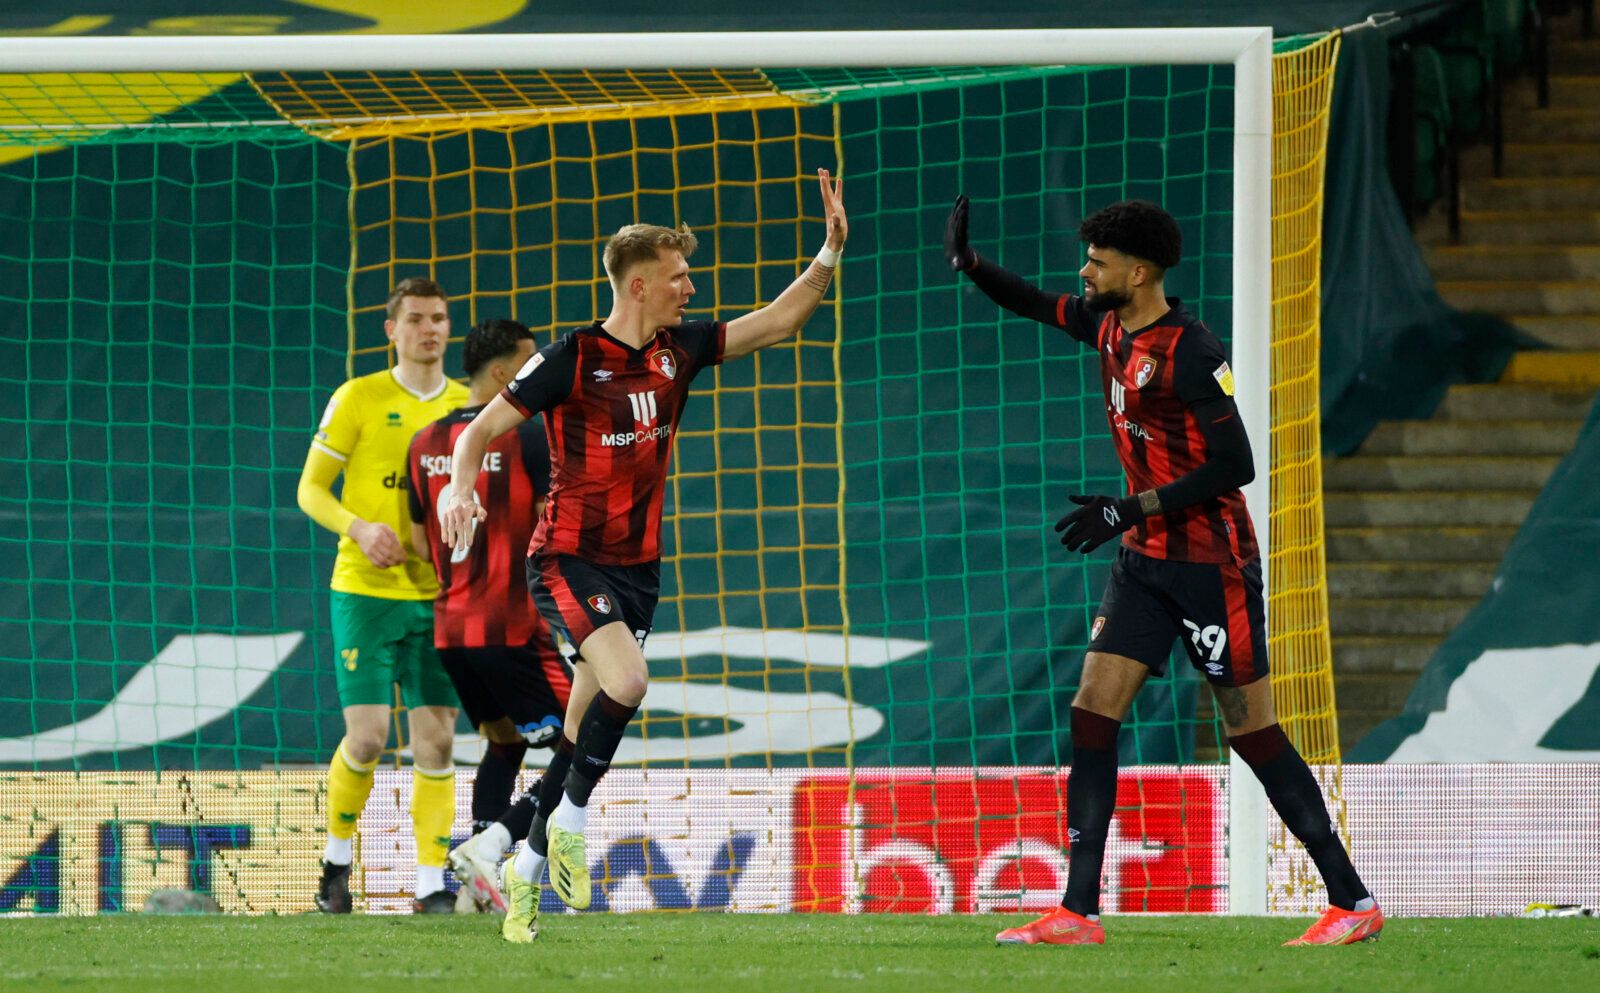 Soccer Football - Championship - Norwich City v AFC Bournemouth - Carrow Road, Norwich, Britain - April 17, 2021 AFC Bournemouth’s Sam Surridge celebrates after scoring their first goalAction Images /John Sibley EDITORIAL USE ONLY. No use with unauthorized audio, video, data, fixture lists, club/league logos or 'live' services. Online in-match use limited to 75 images, no video emulation. No use in betting, games or single club /league/player publications.  Please contact your account representa